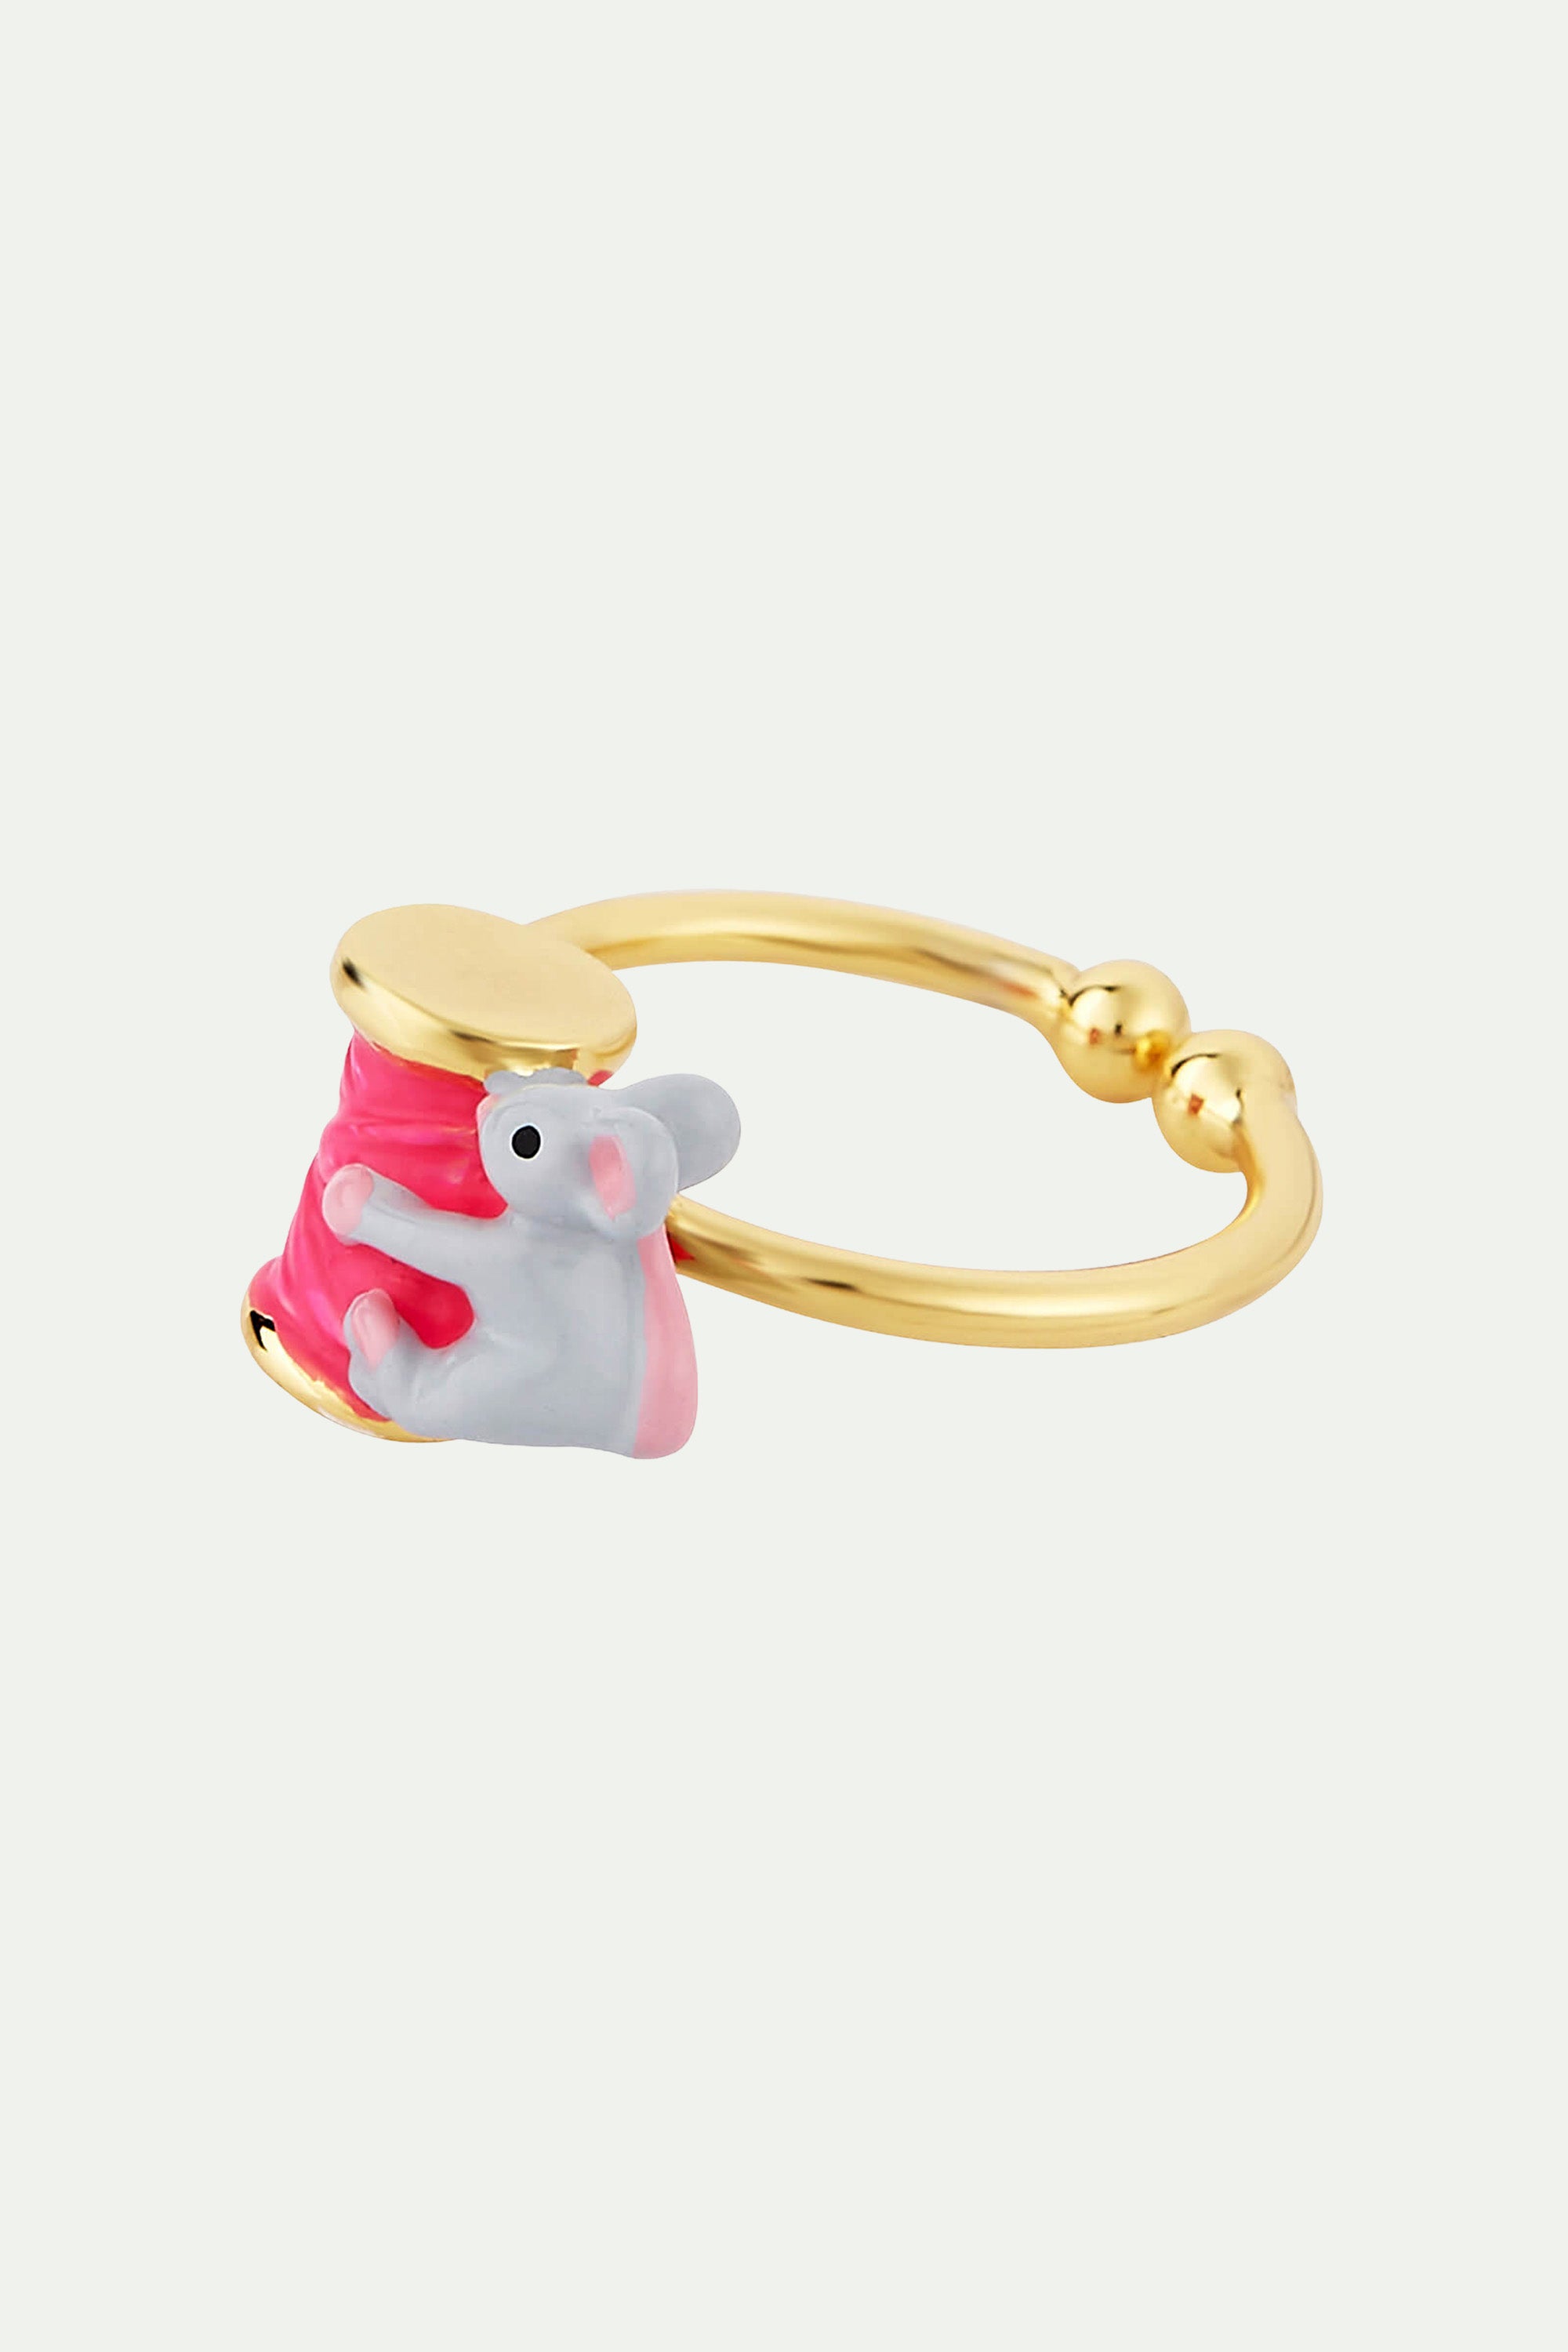 Mouse and Spool of Thread adjustable ring